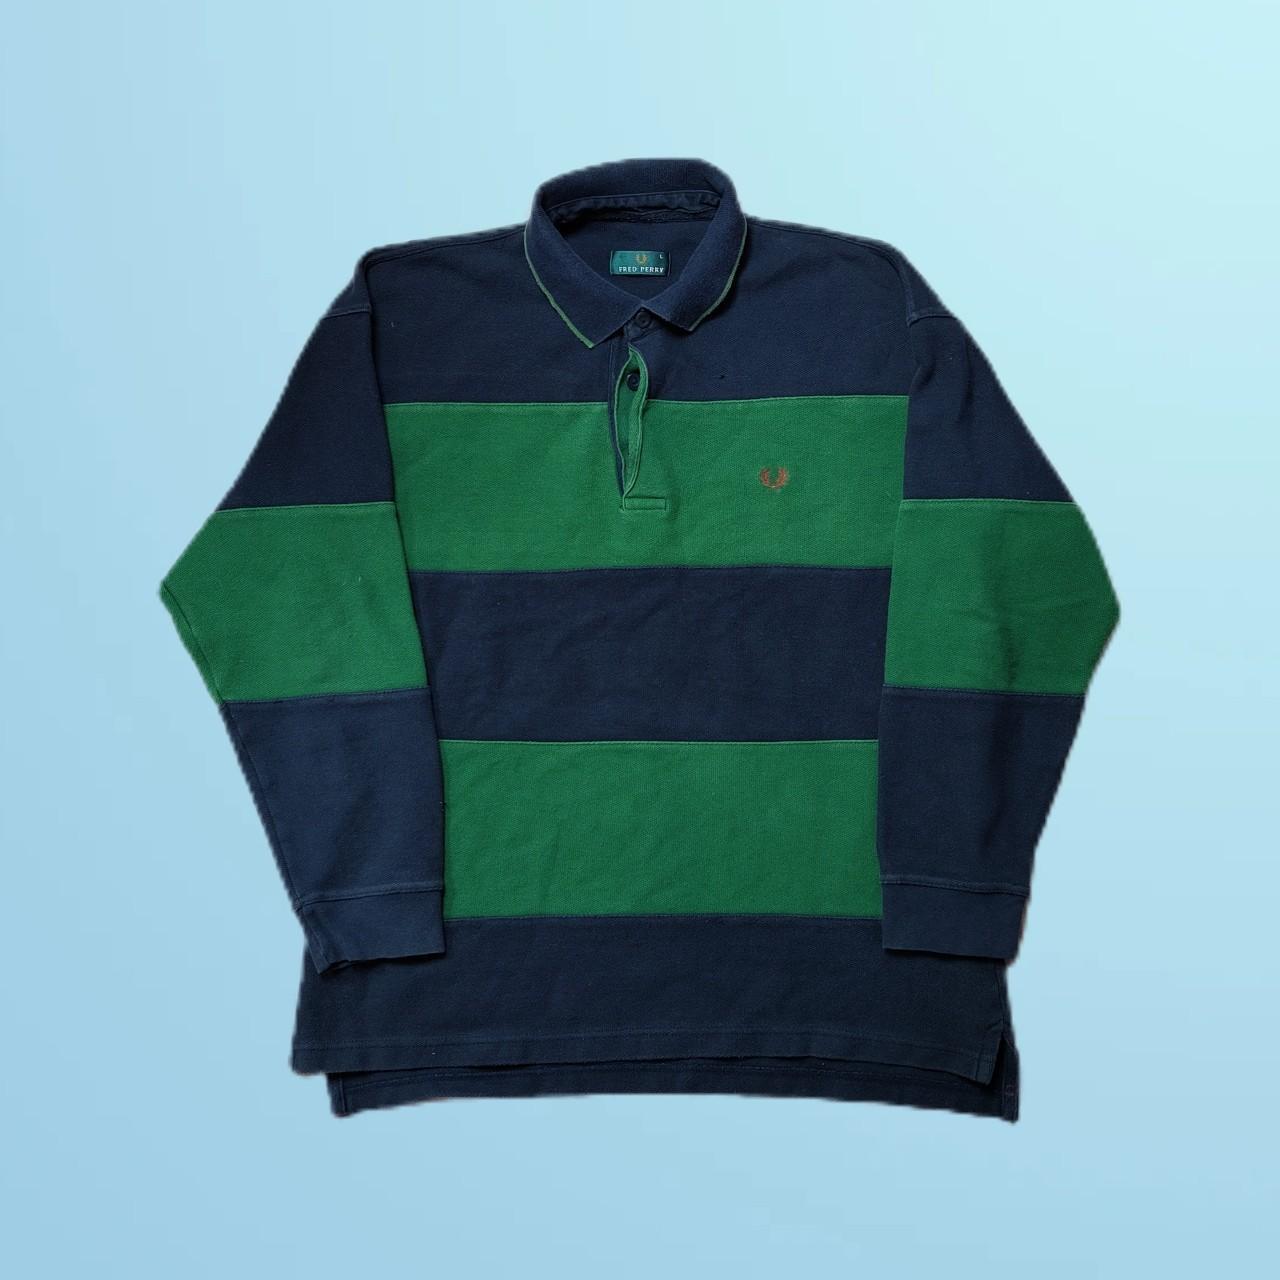 Vintage Fred Perry Rugby Shirt in Navy Blue & Green... - Depop